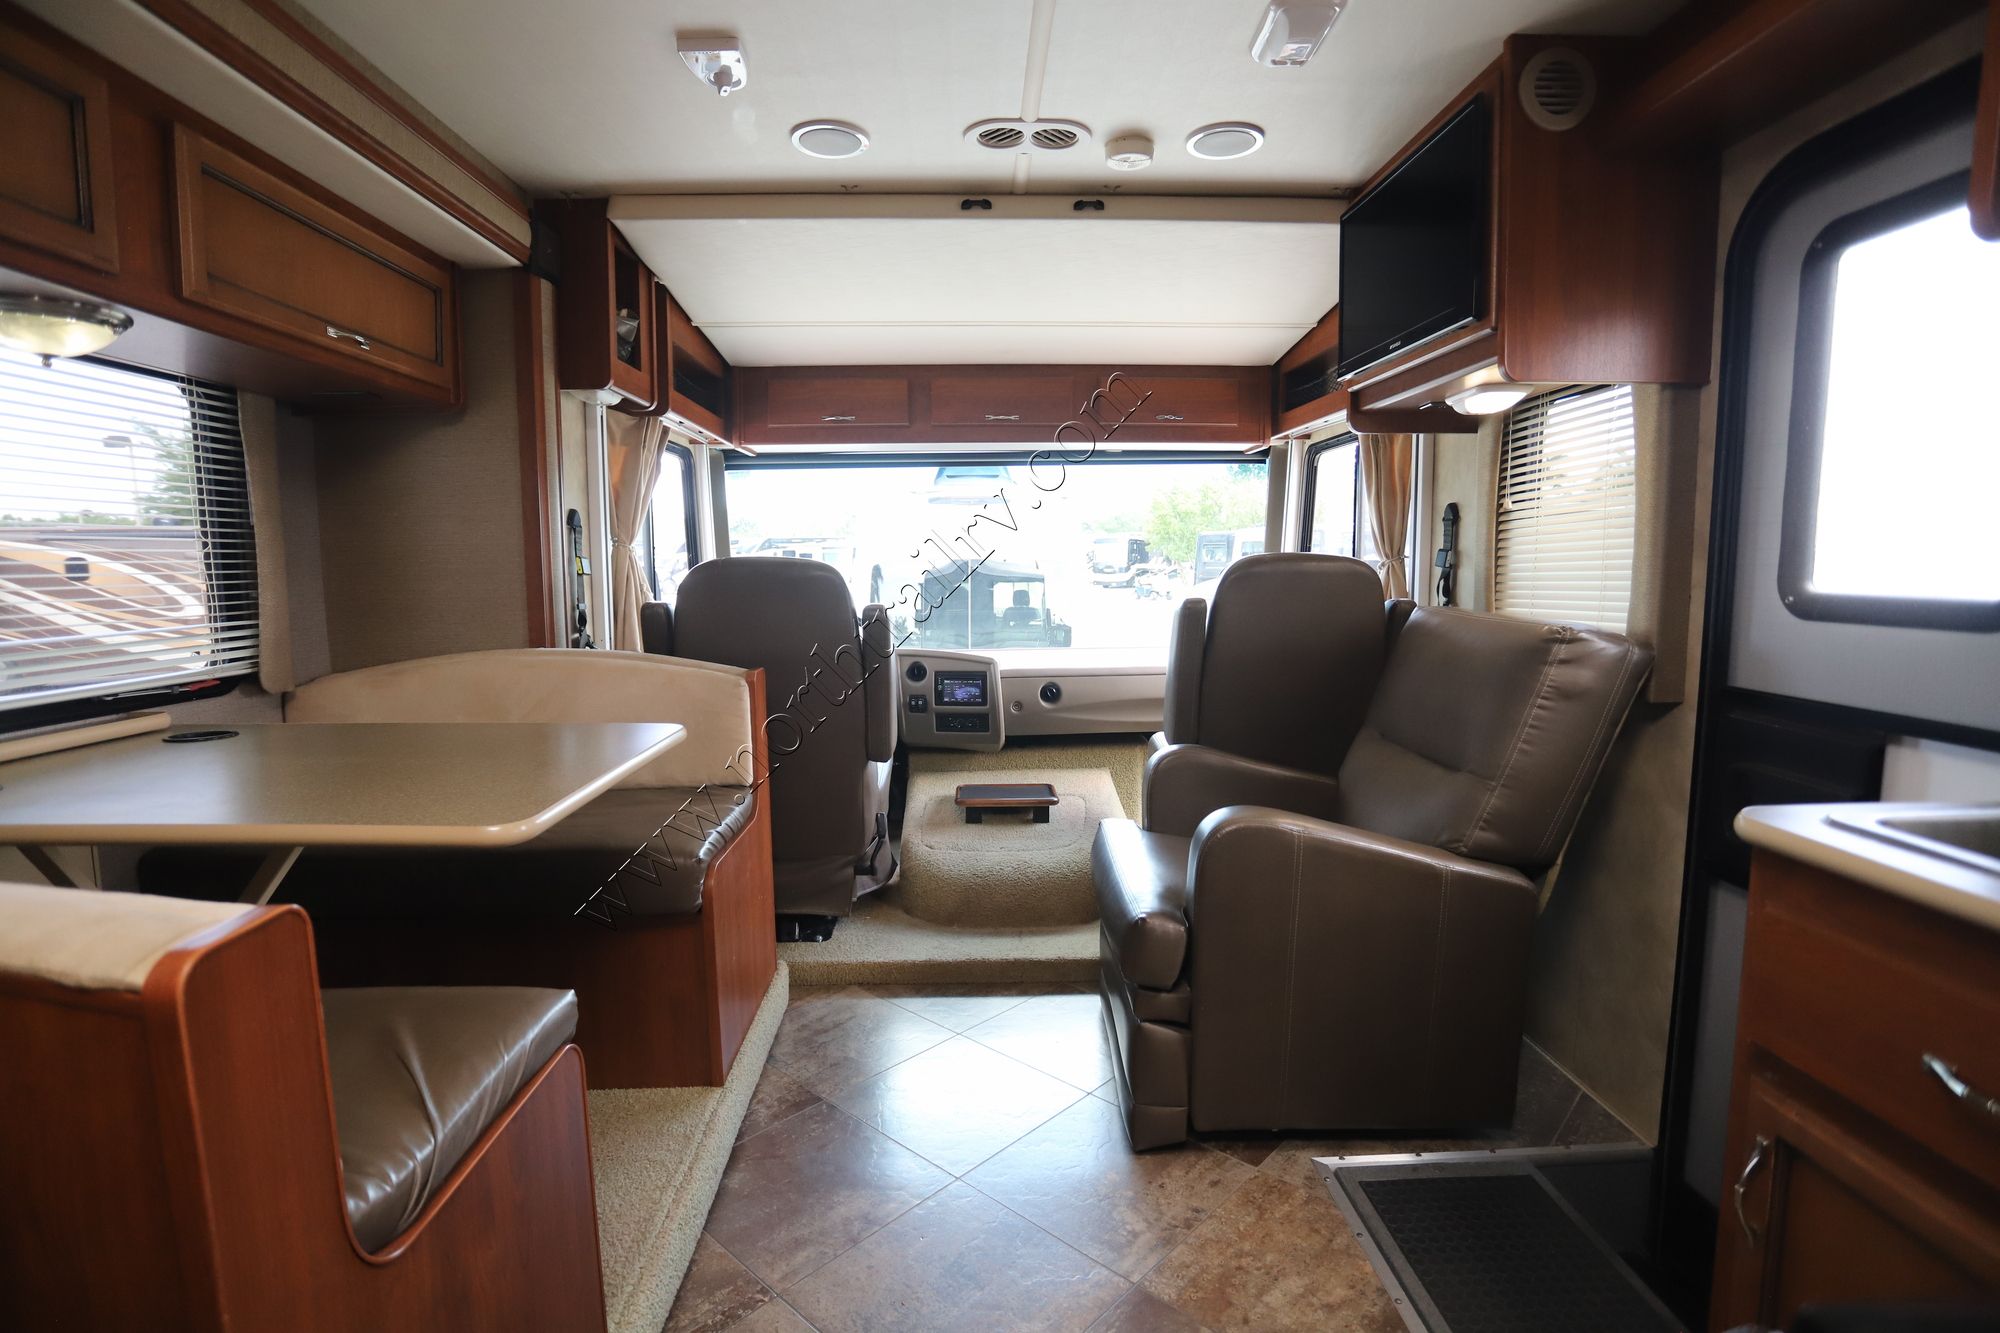 Used 2015 Fleetwood Flair 26E Class A  For Sale